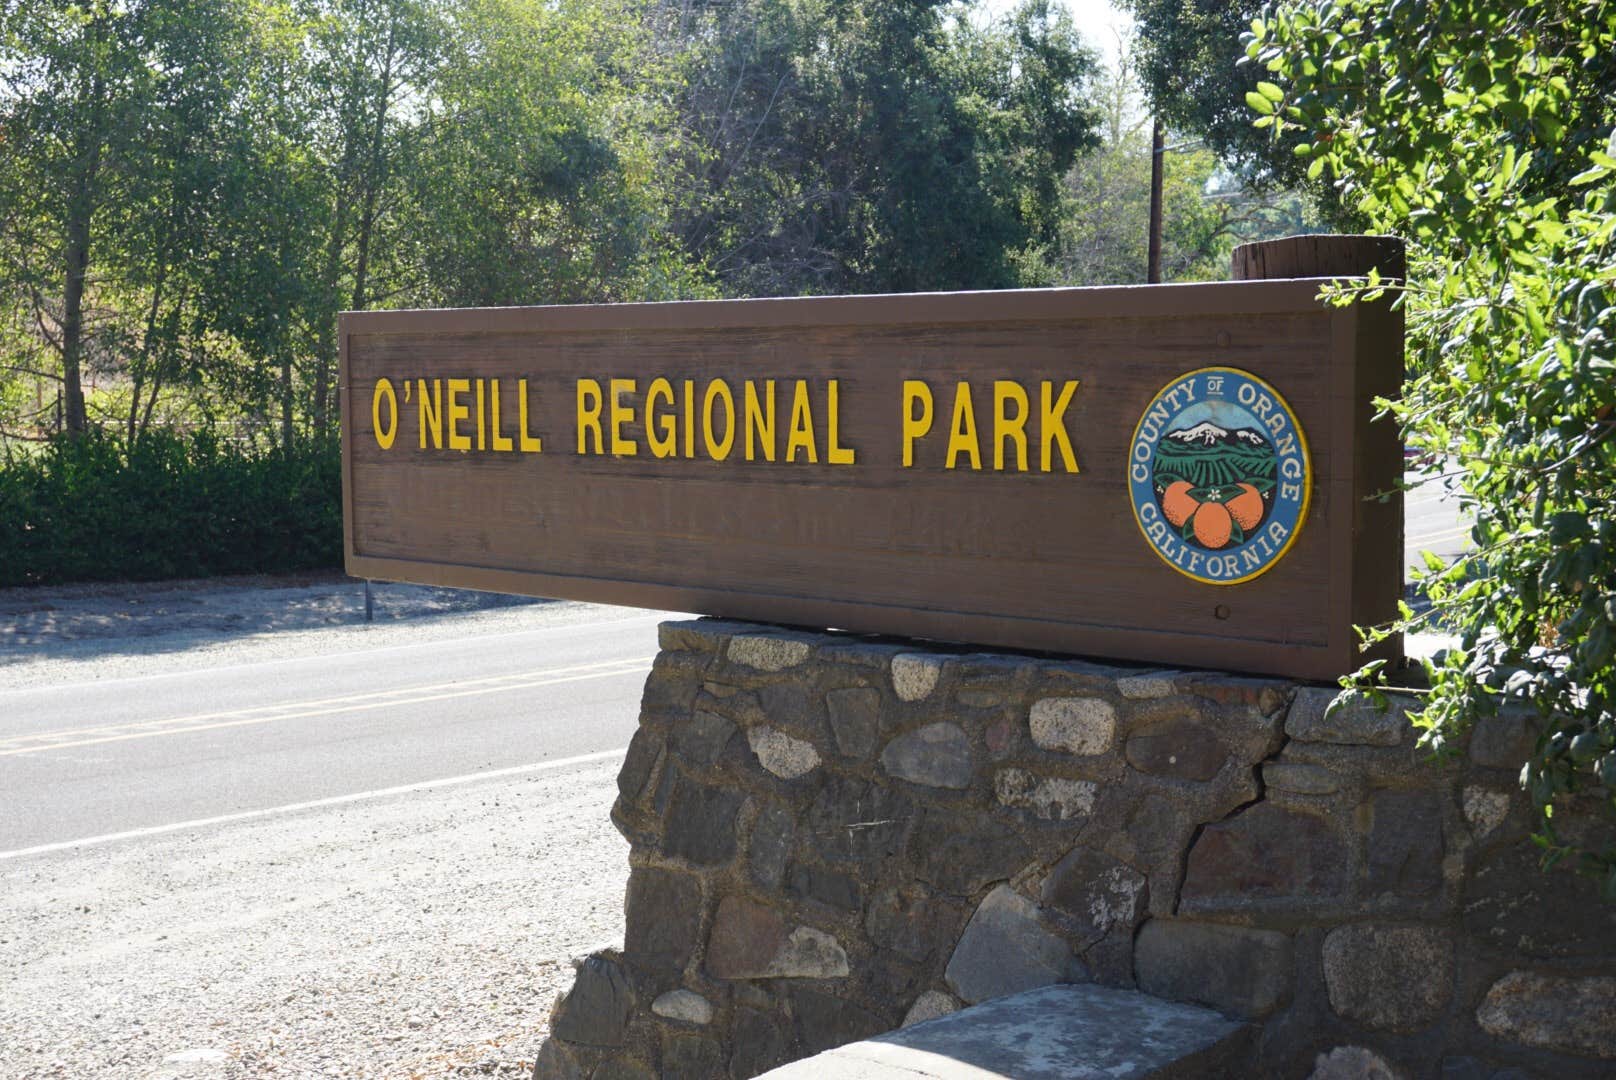 Camper submitted image from O'Neill Regional Park - 2